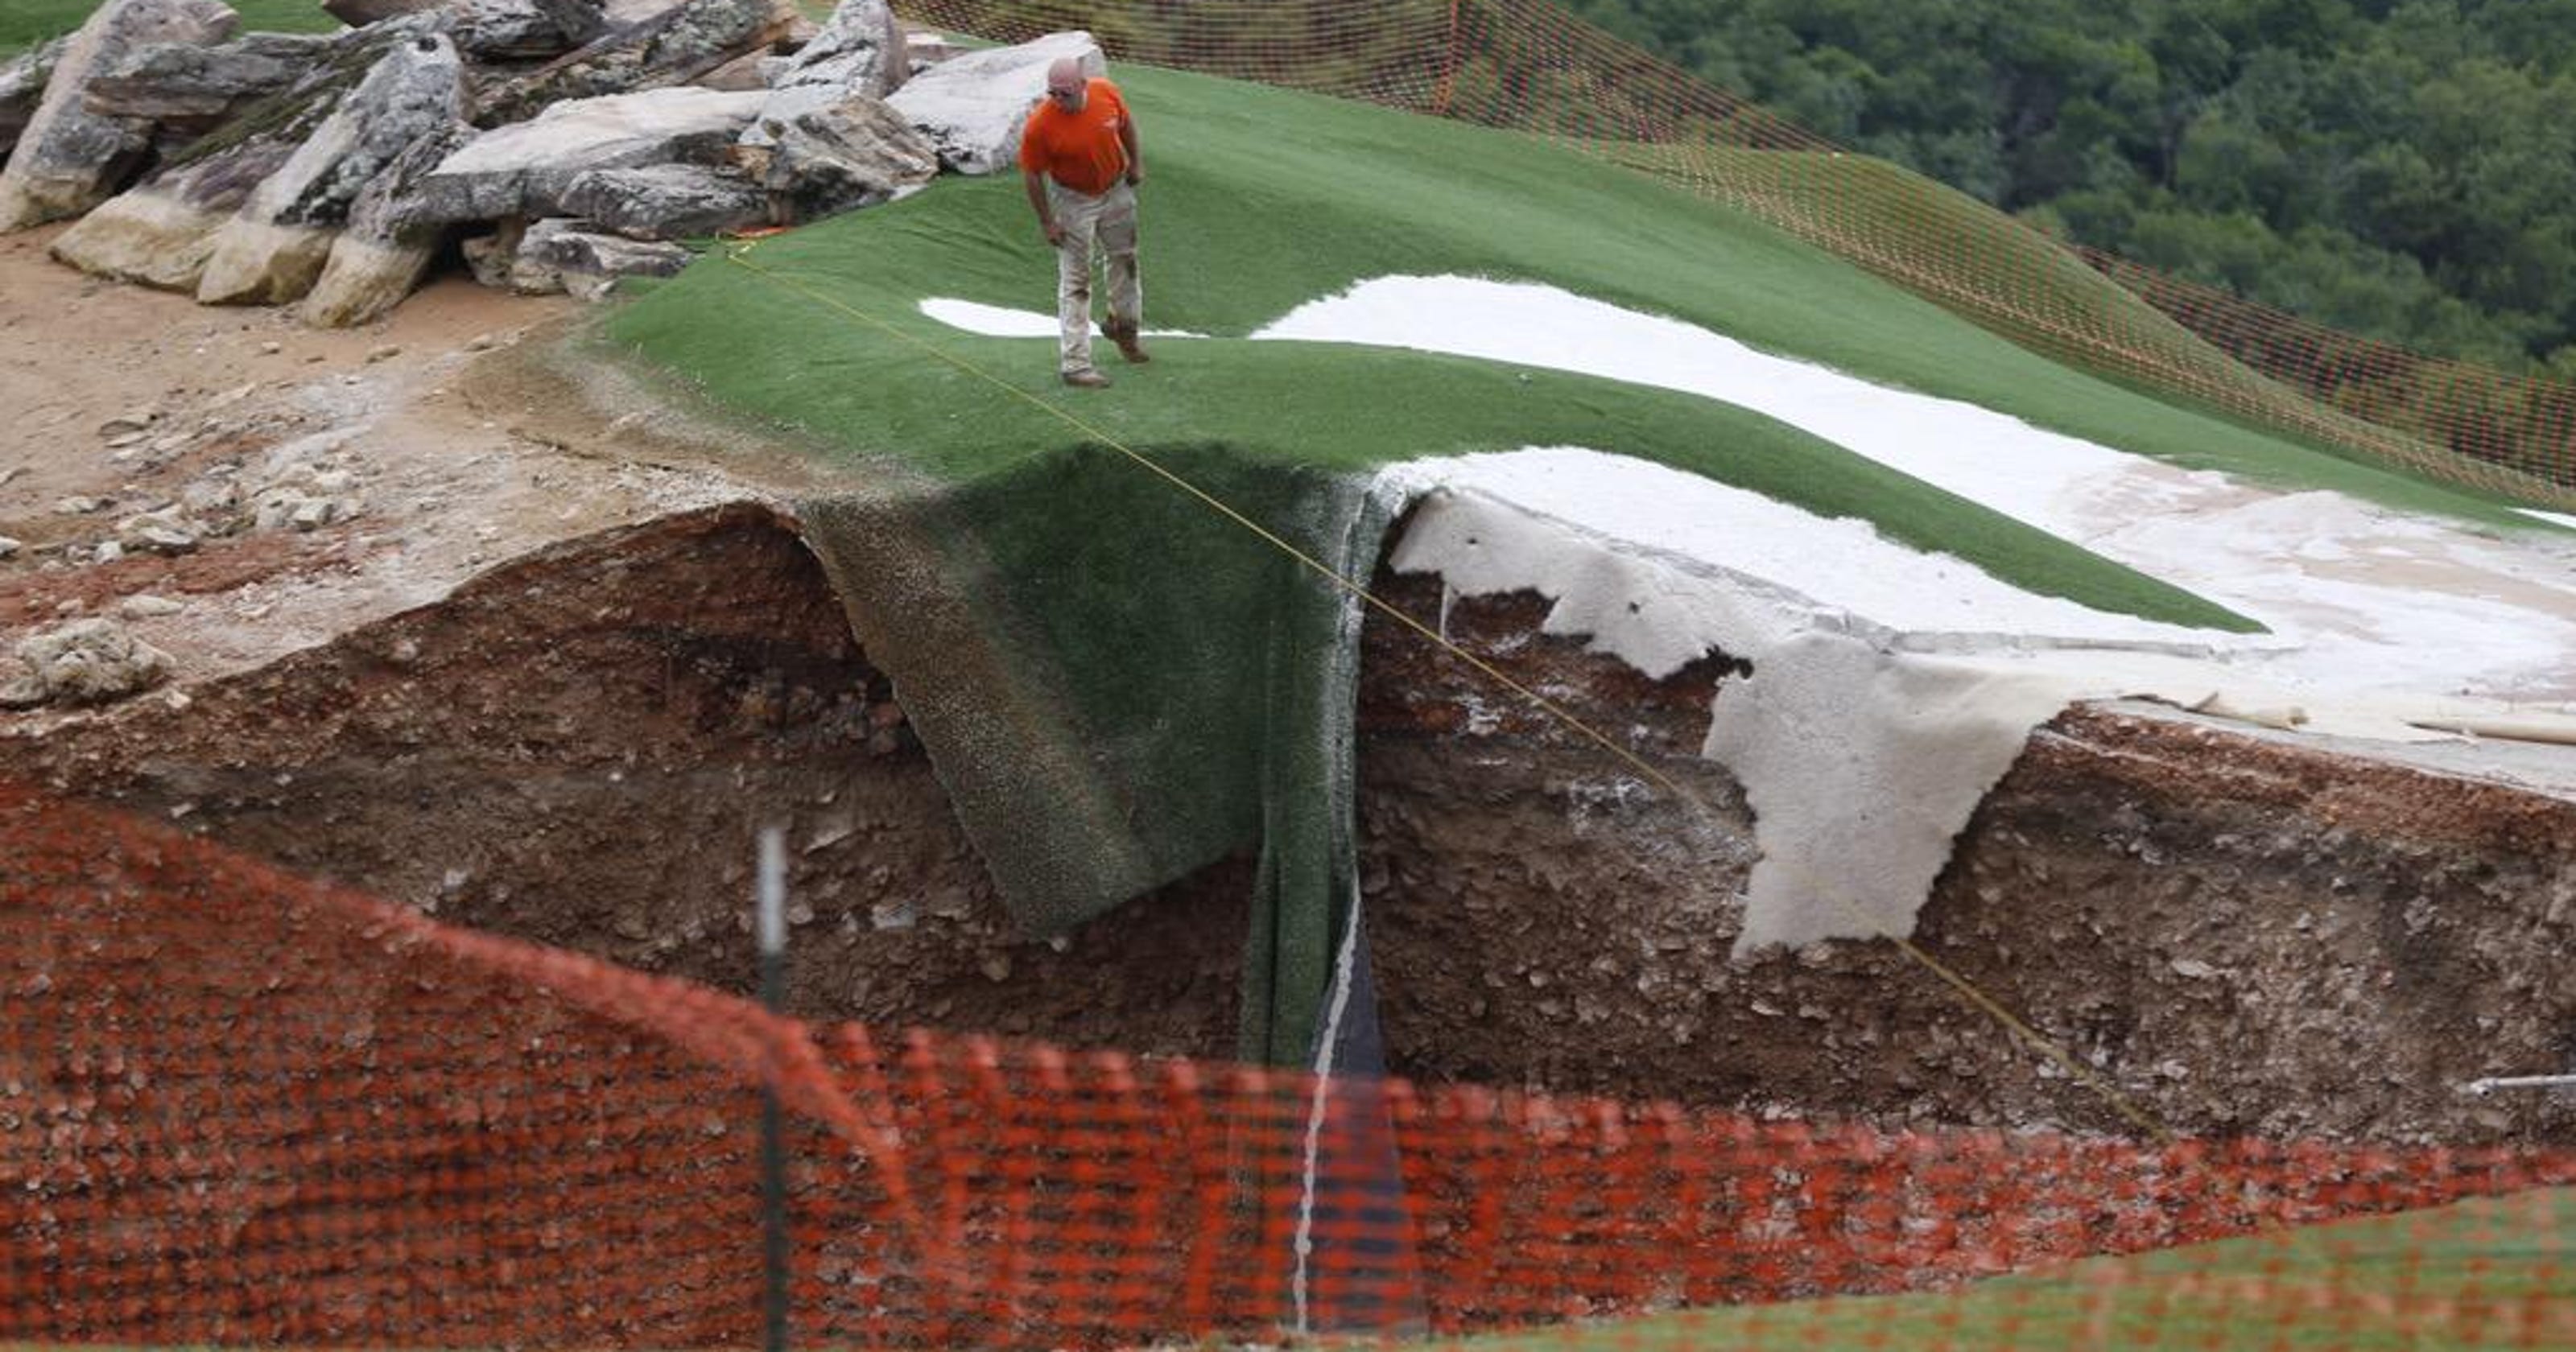 Four Sink Holes Open Up On Missouri Golf Course